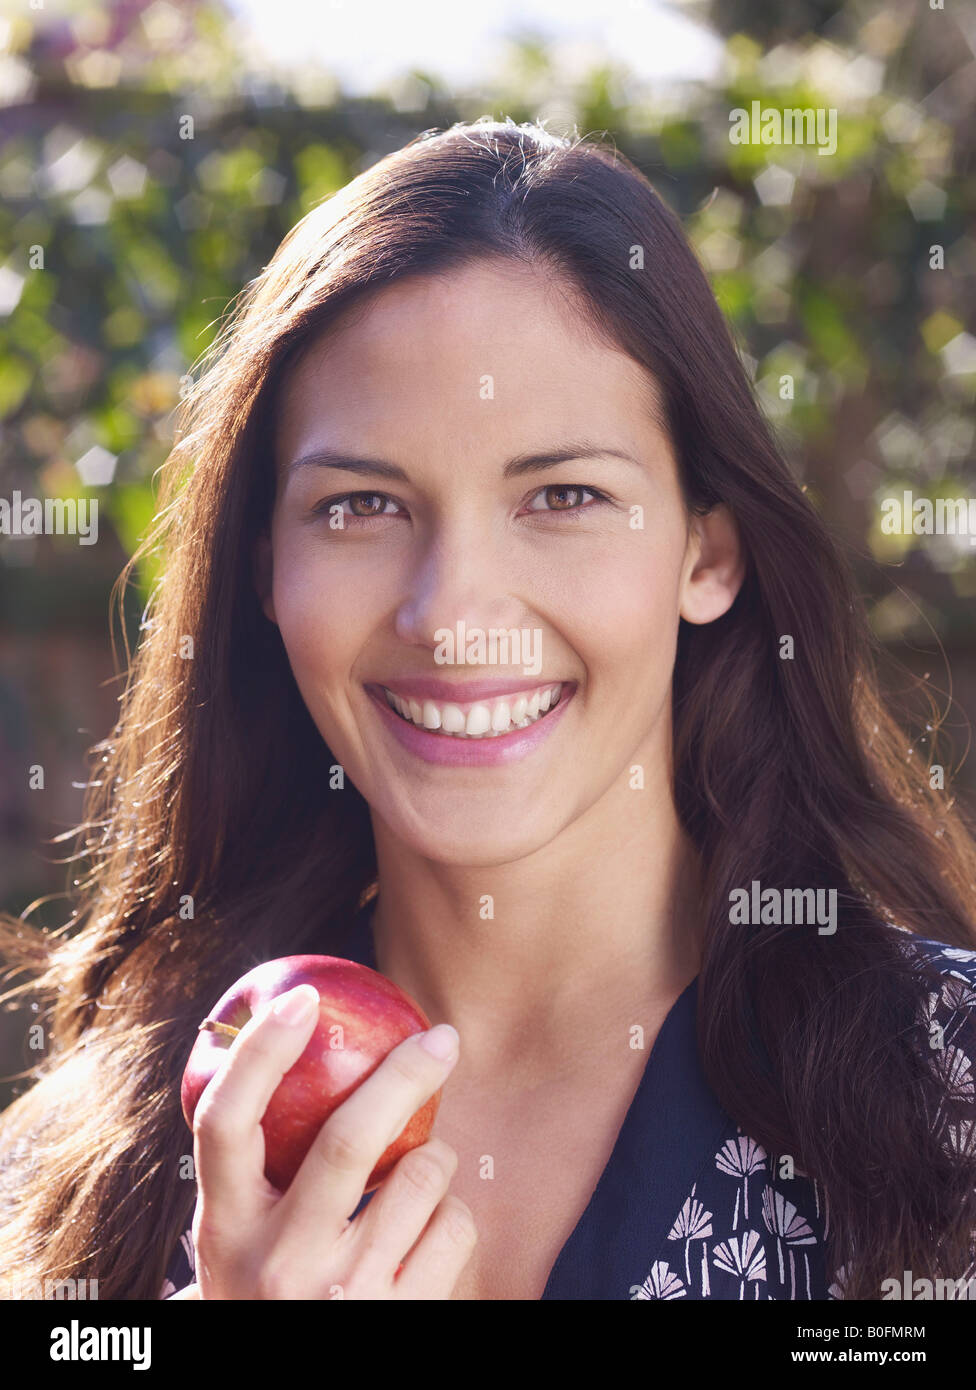 Young woman smiling and holding apple Banque D'Images